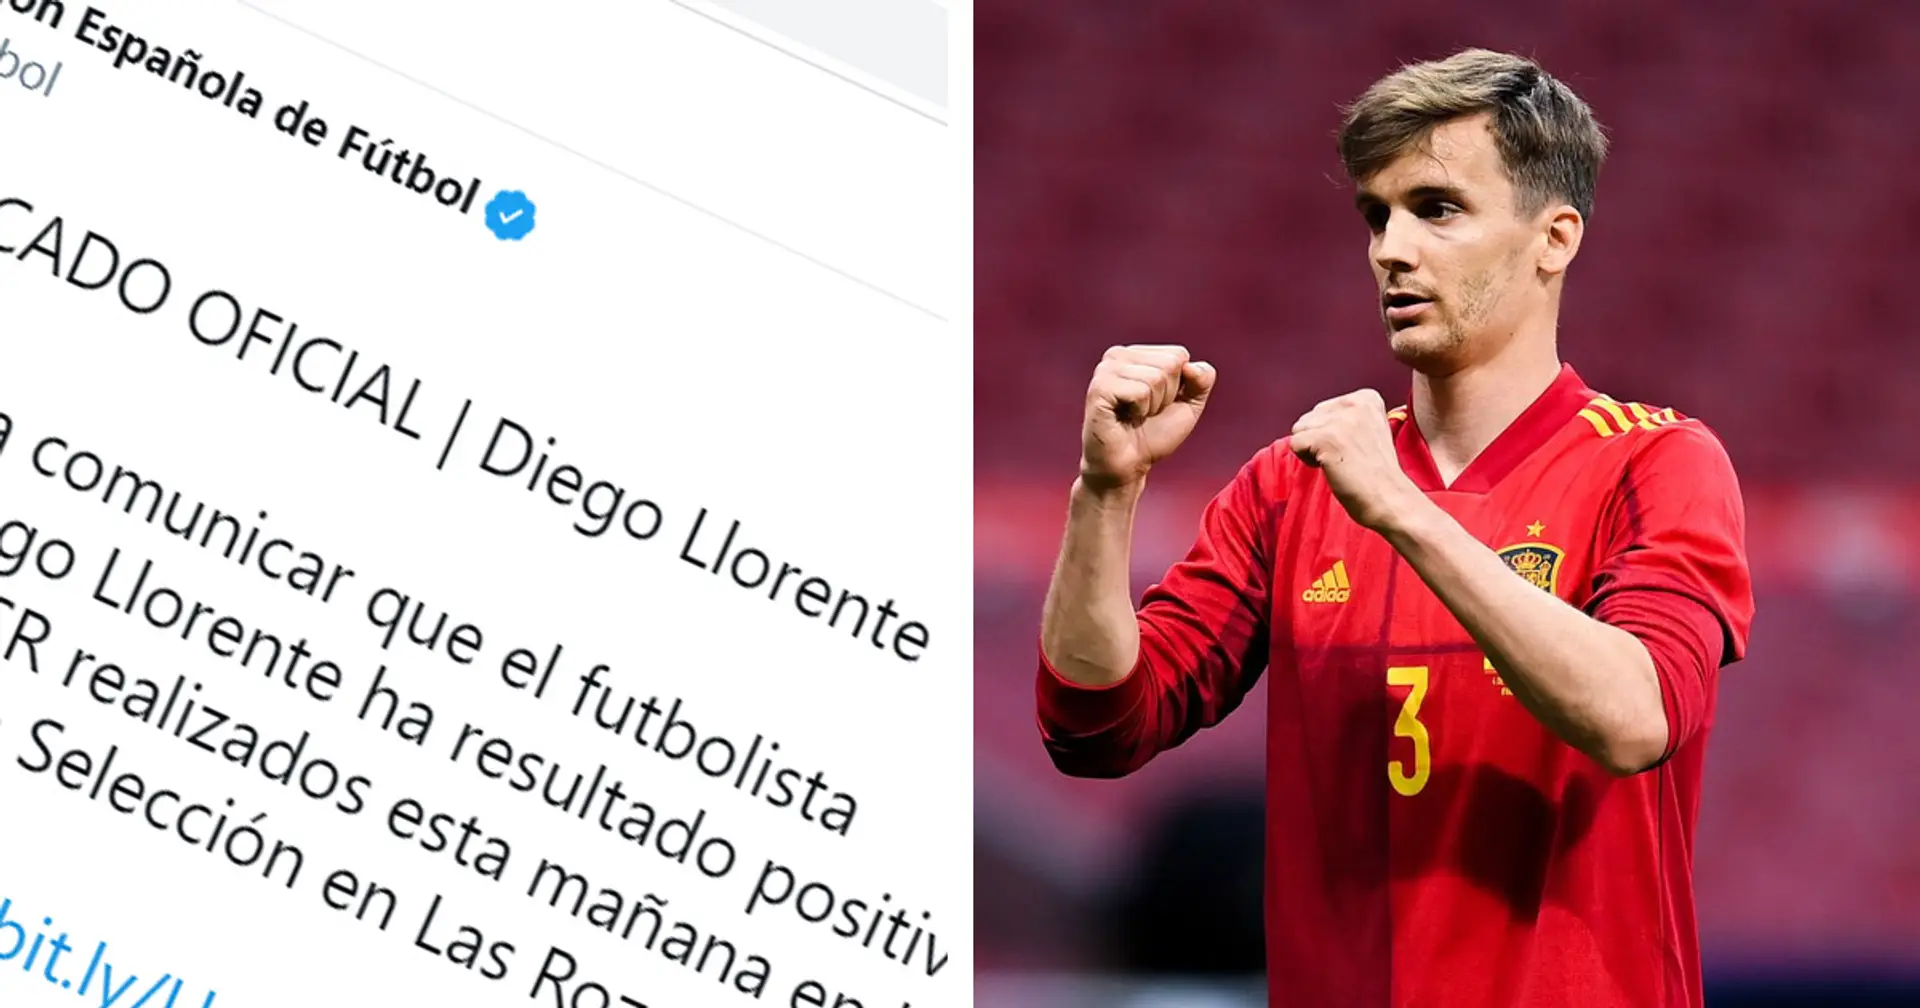 Diego Llorente becomes 2nd Spain player after Busquets to test positive for Covid ahead of Euro 2020 